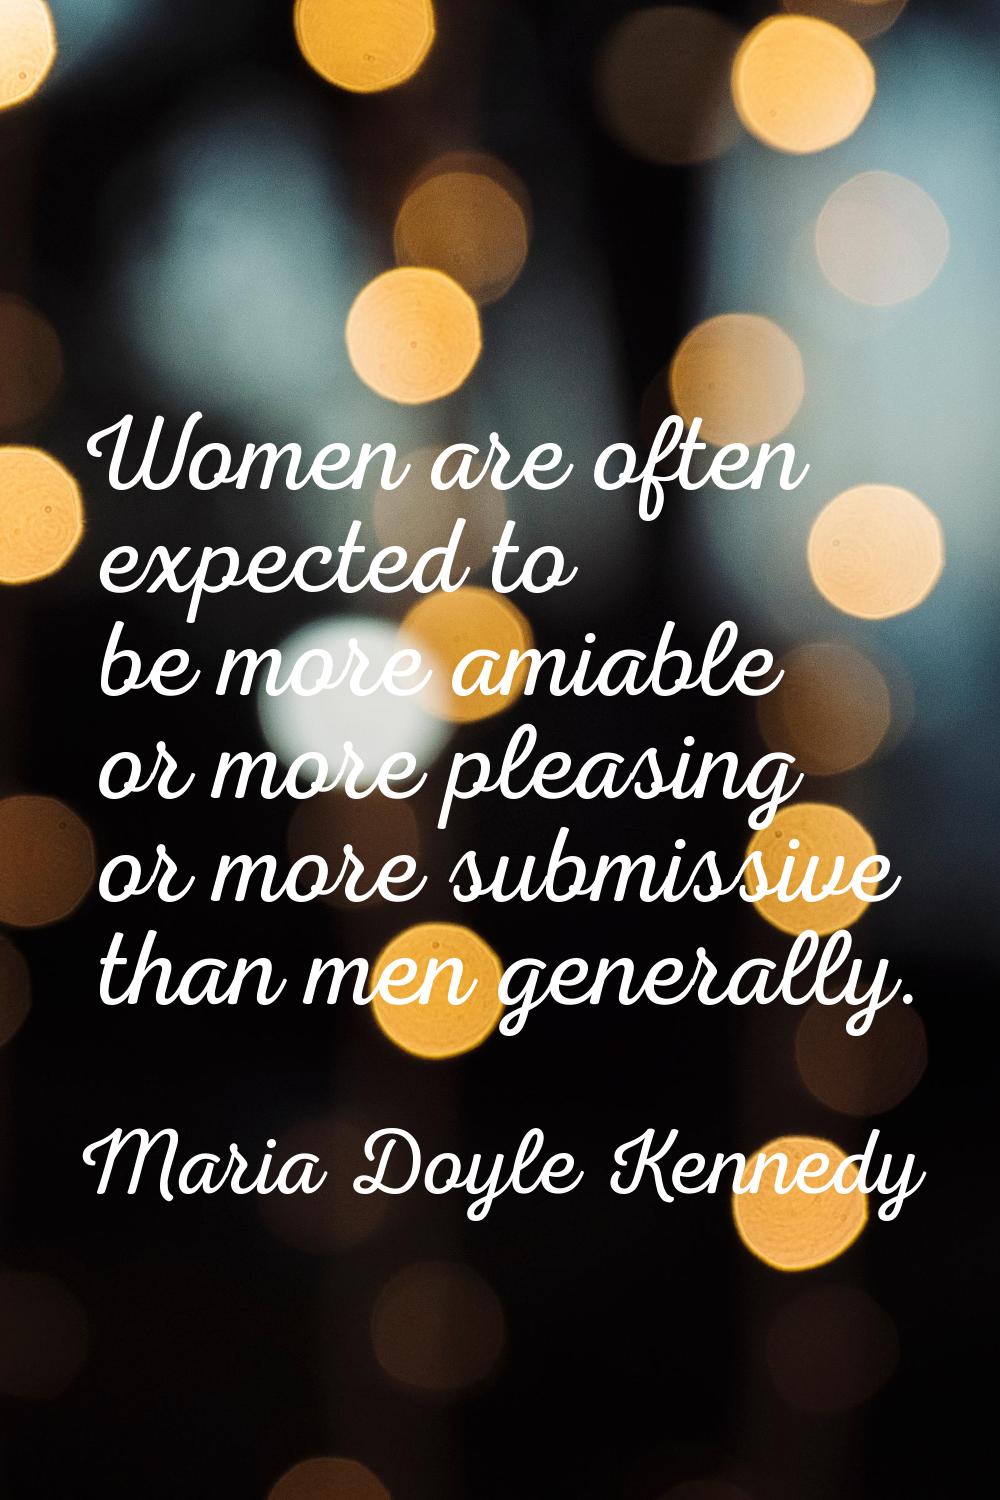 Women are often expected to be more amiable or more pleasing or more submissive than men generally.